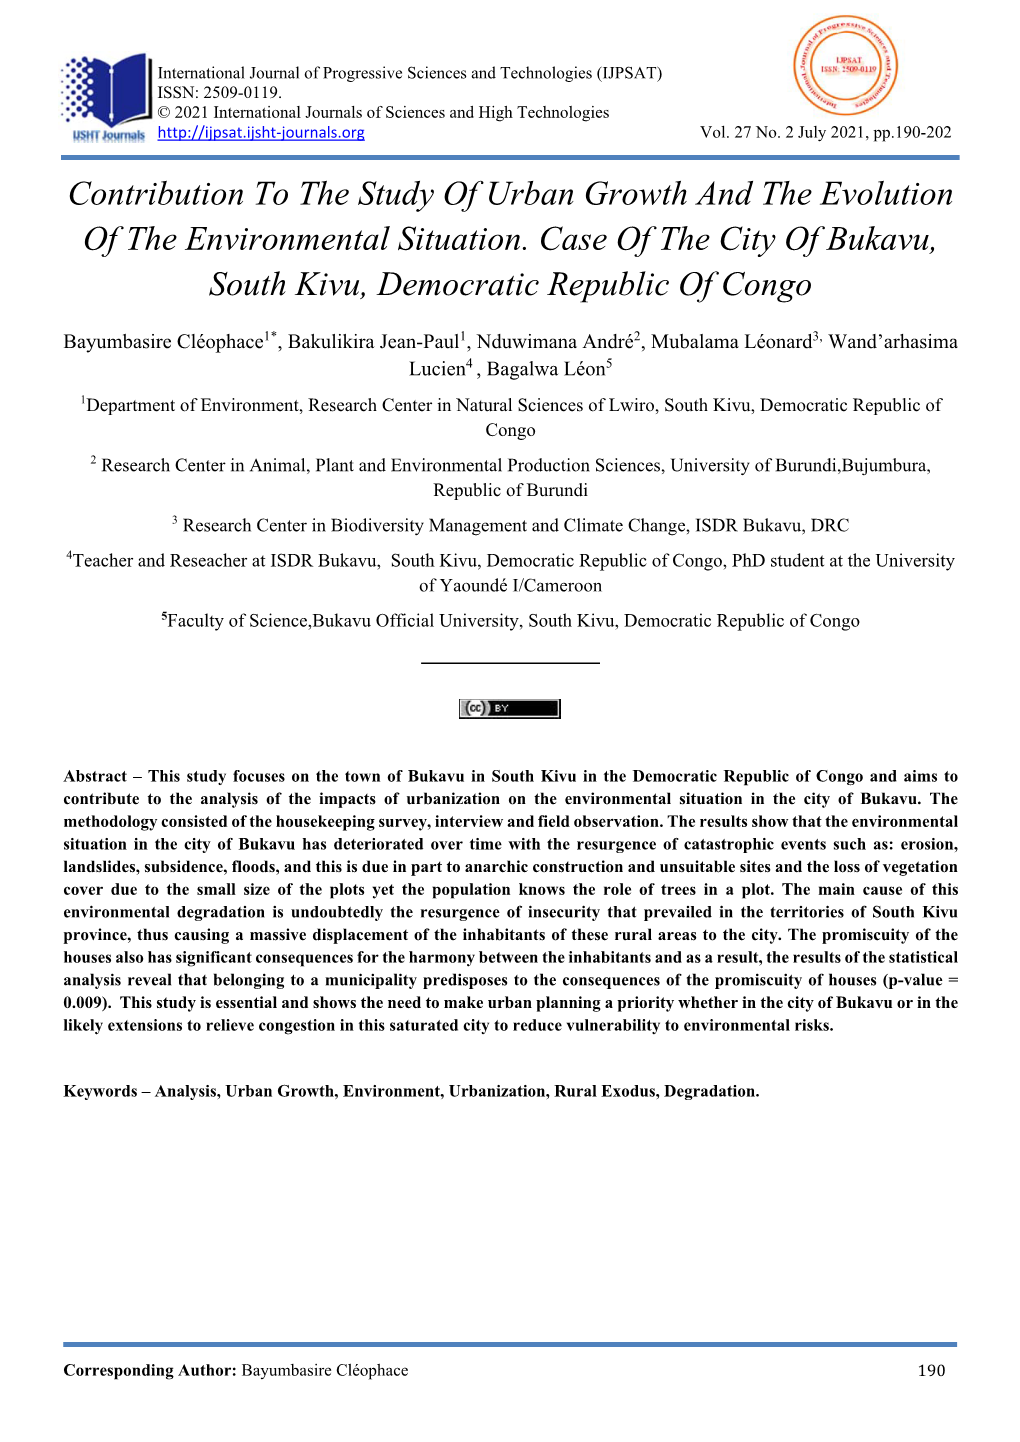 Contribution to the Study of Urban Growth and the Evolution of the Environmental Situation